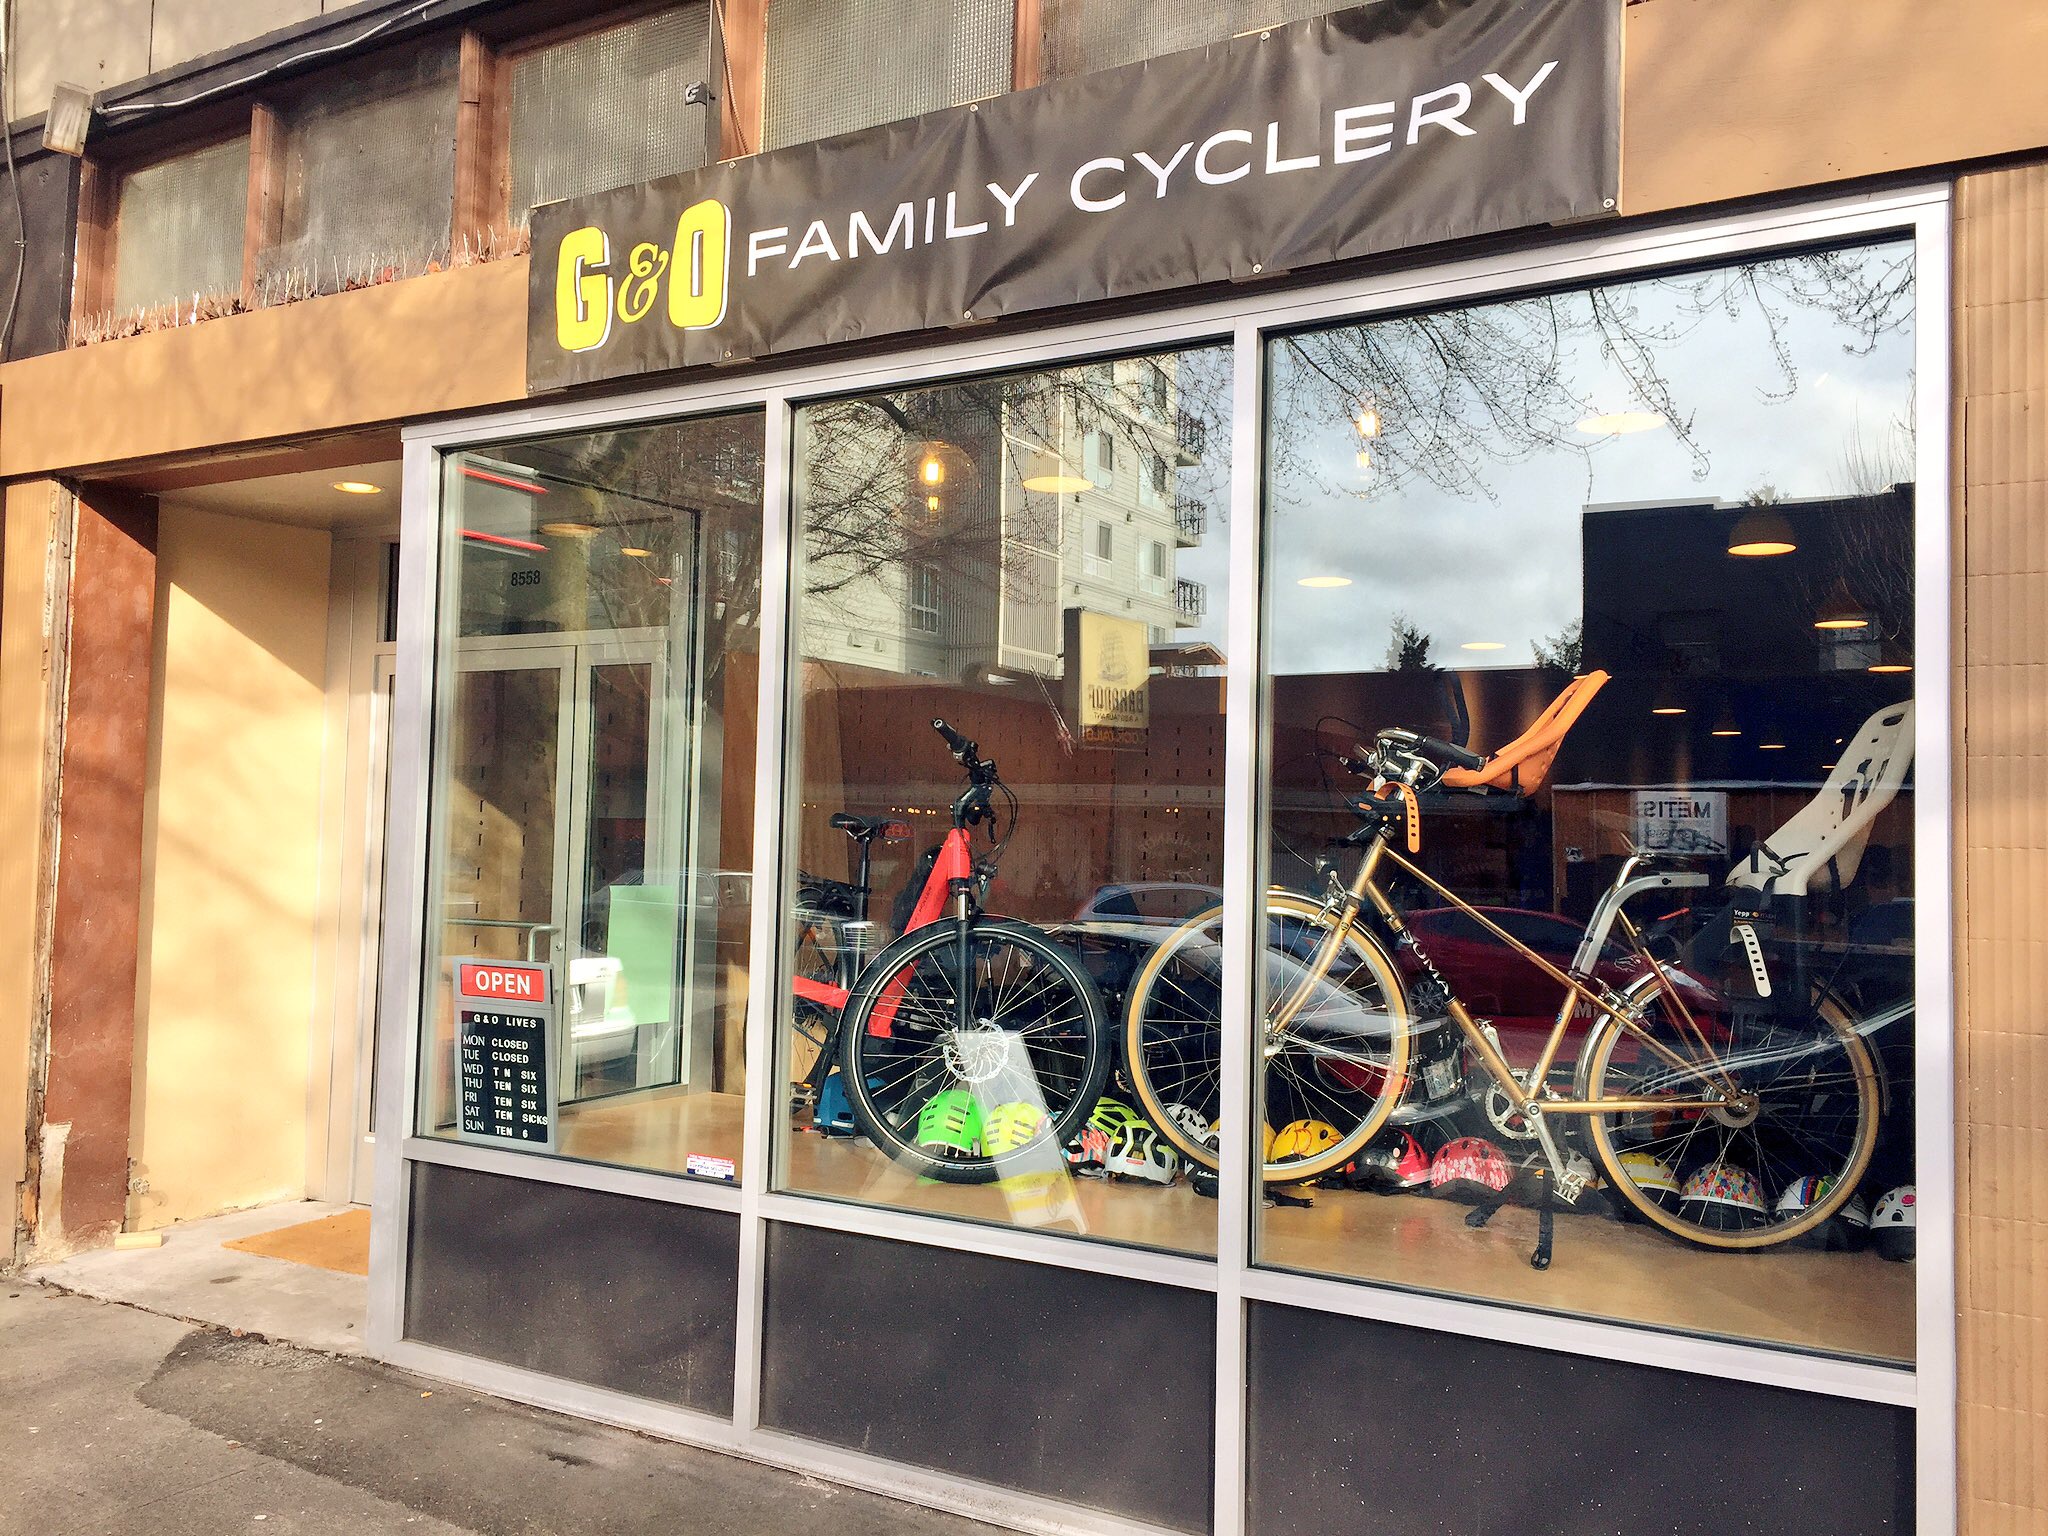 One year after the Greenwood explosion, G&O Family Cyclery opens its